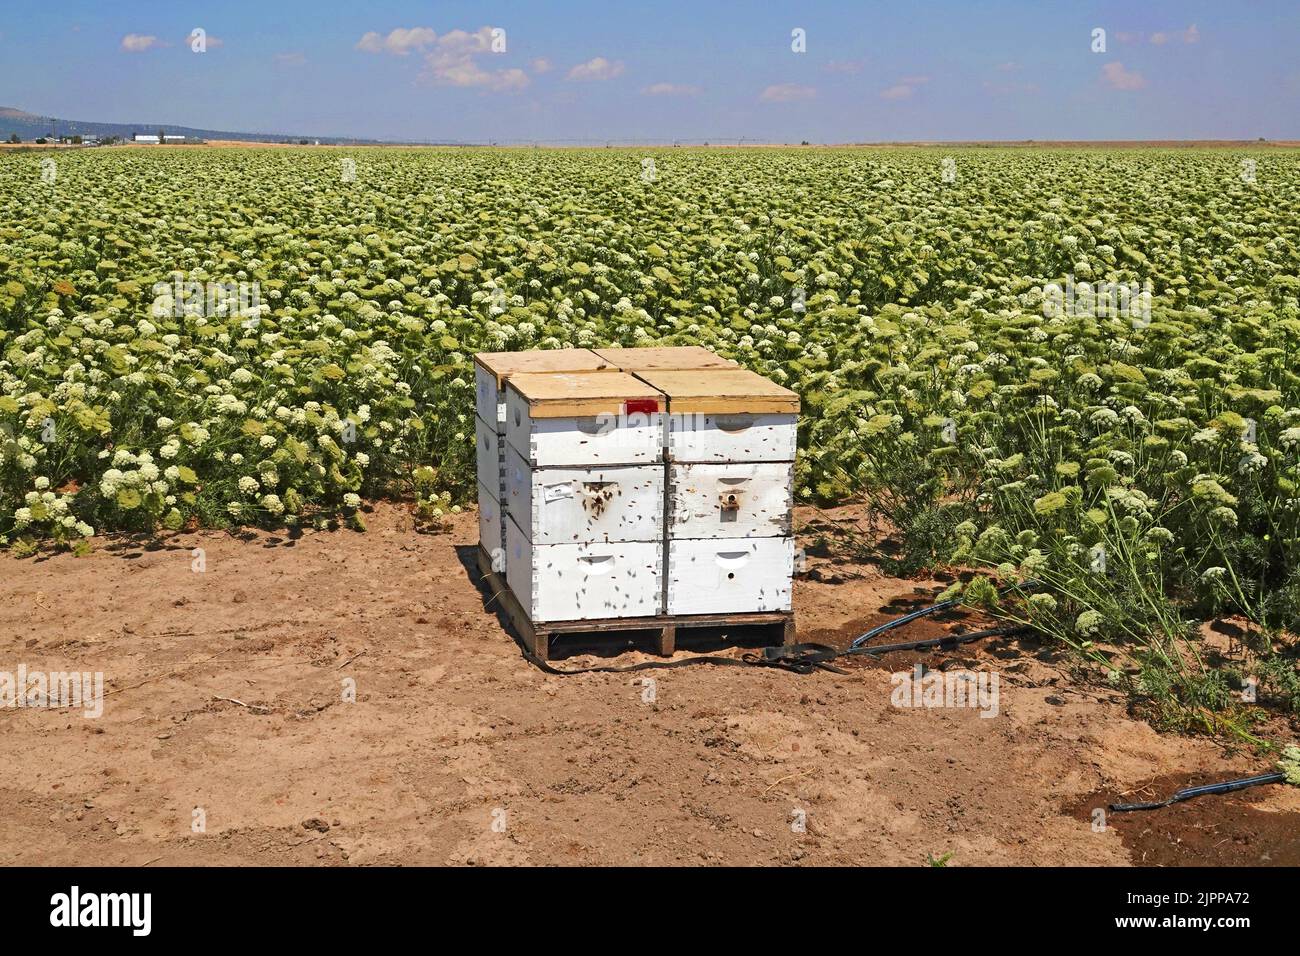 An active bee hive with european honey bees near a large field of carrot seed, being grown near the small town of Culver, Oregon. Carrot seed is used in animal feed. Stock Photo